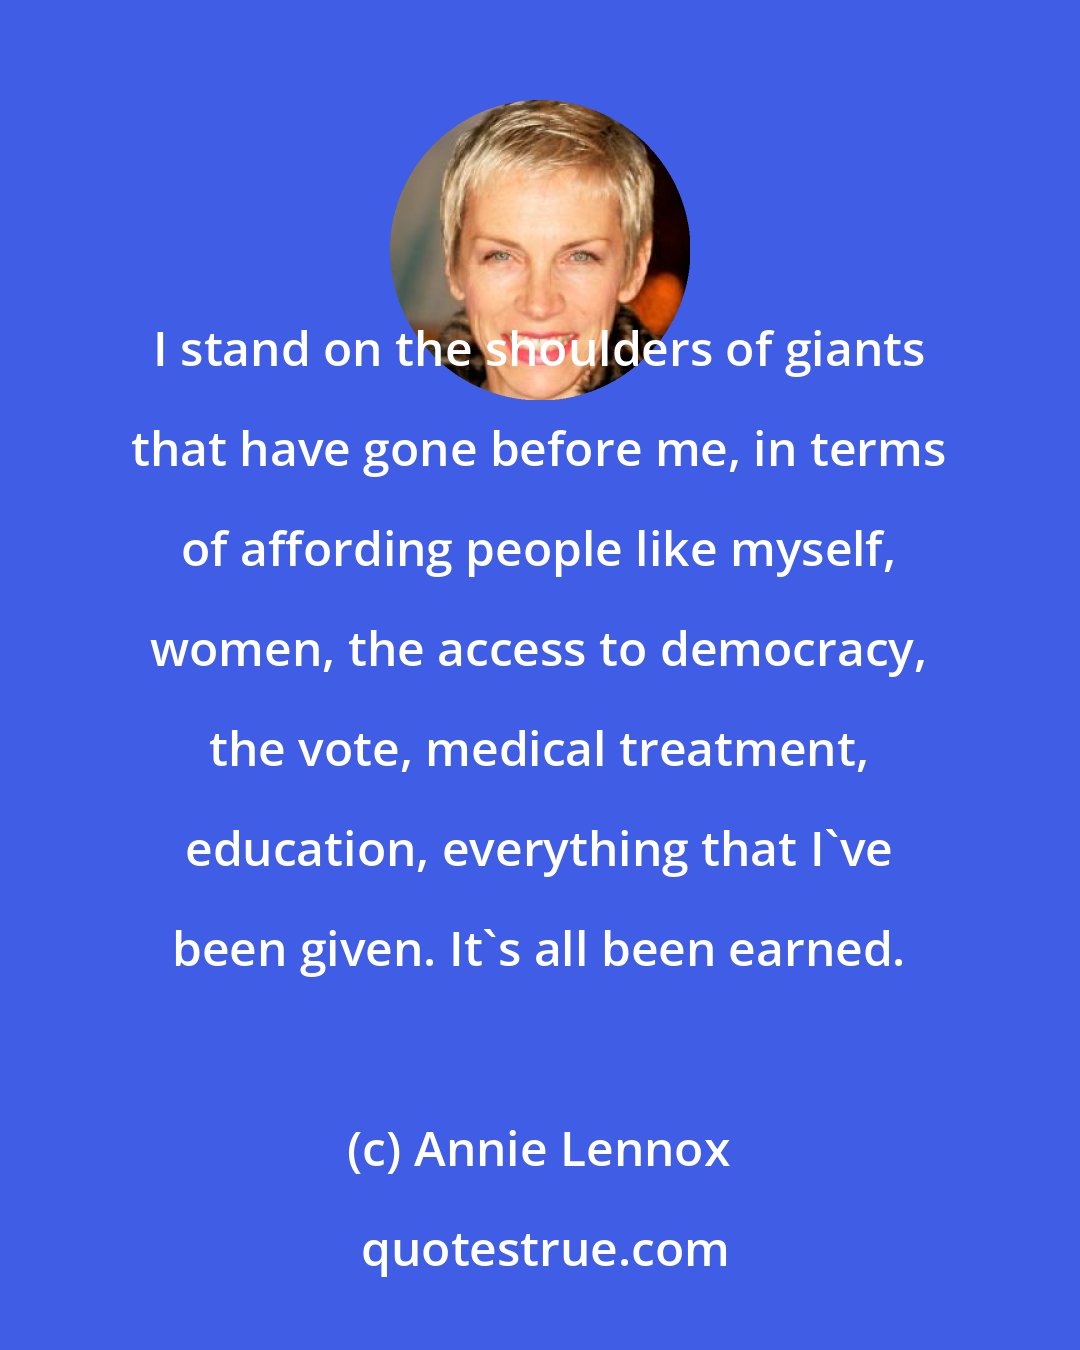 Annie Lennox: I stand on the shoulders of giants that have gone before me, in terms of affording people like myself, women, the access to democracy, the vote, medical treatment, education, everything that I've been given. It's all been earned.